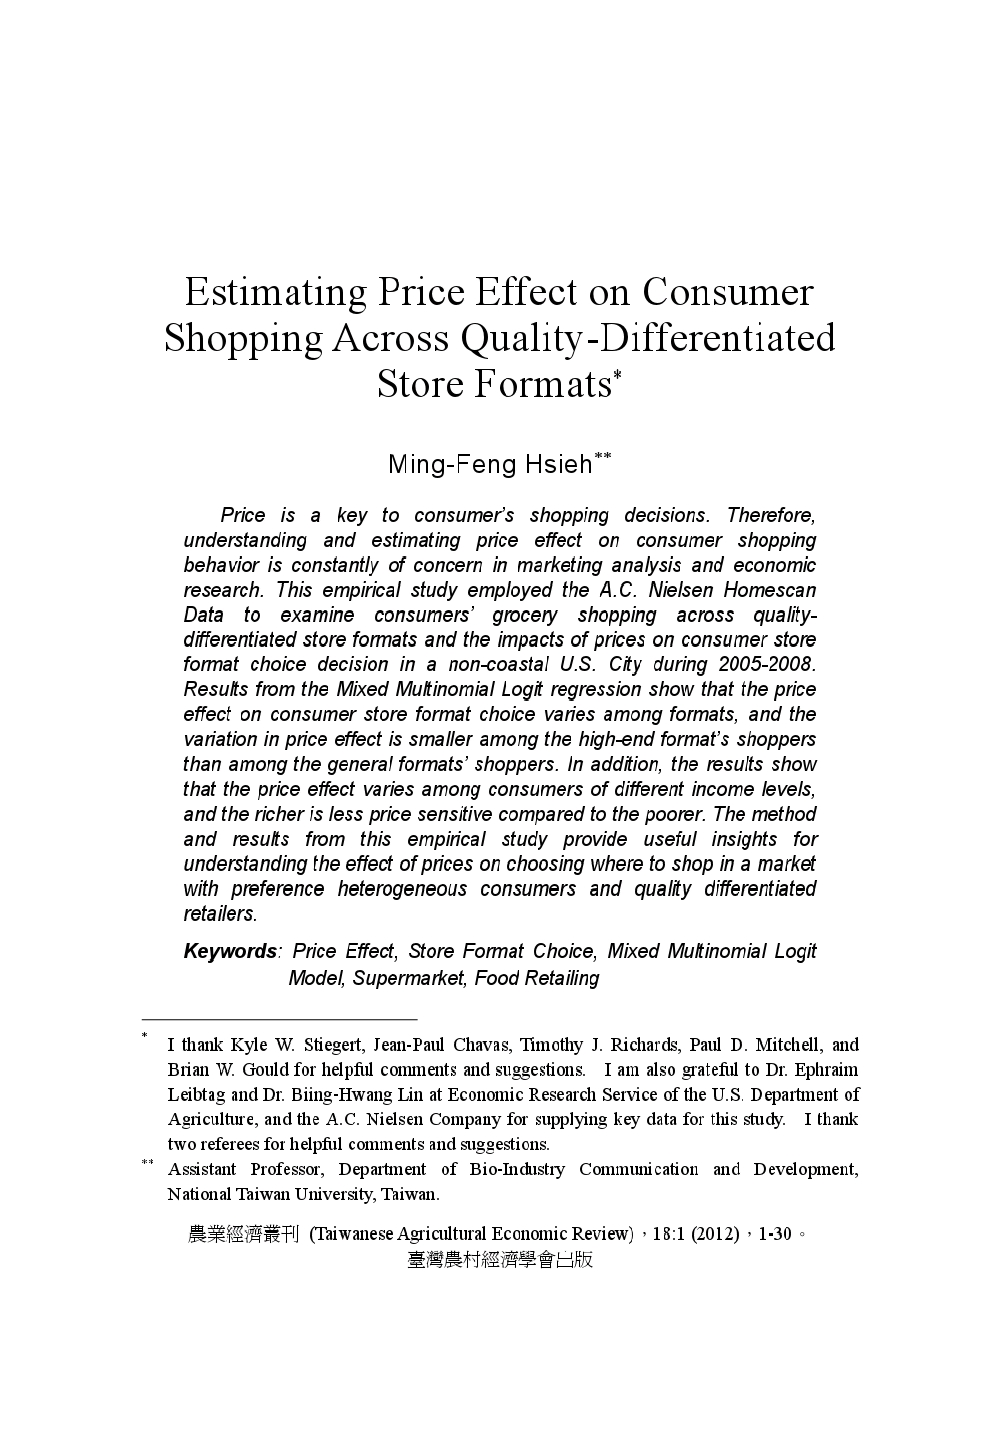 Estimating_Price_Effect_on_Consumer_Shopping_Across_Quality-Differentiated_Store_Formats.jpg